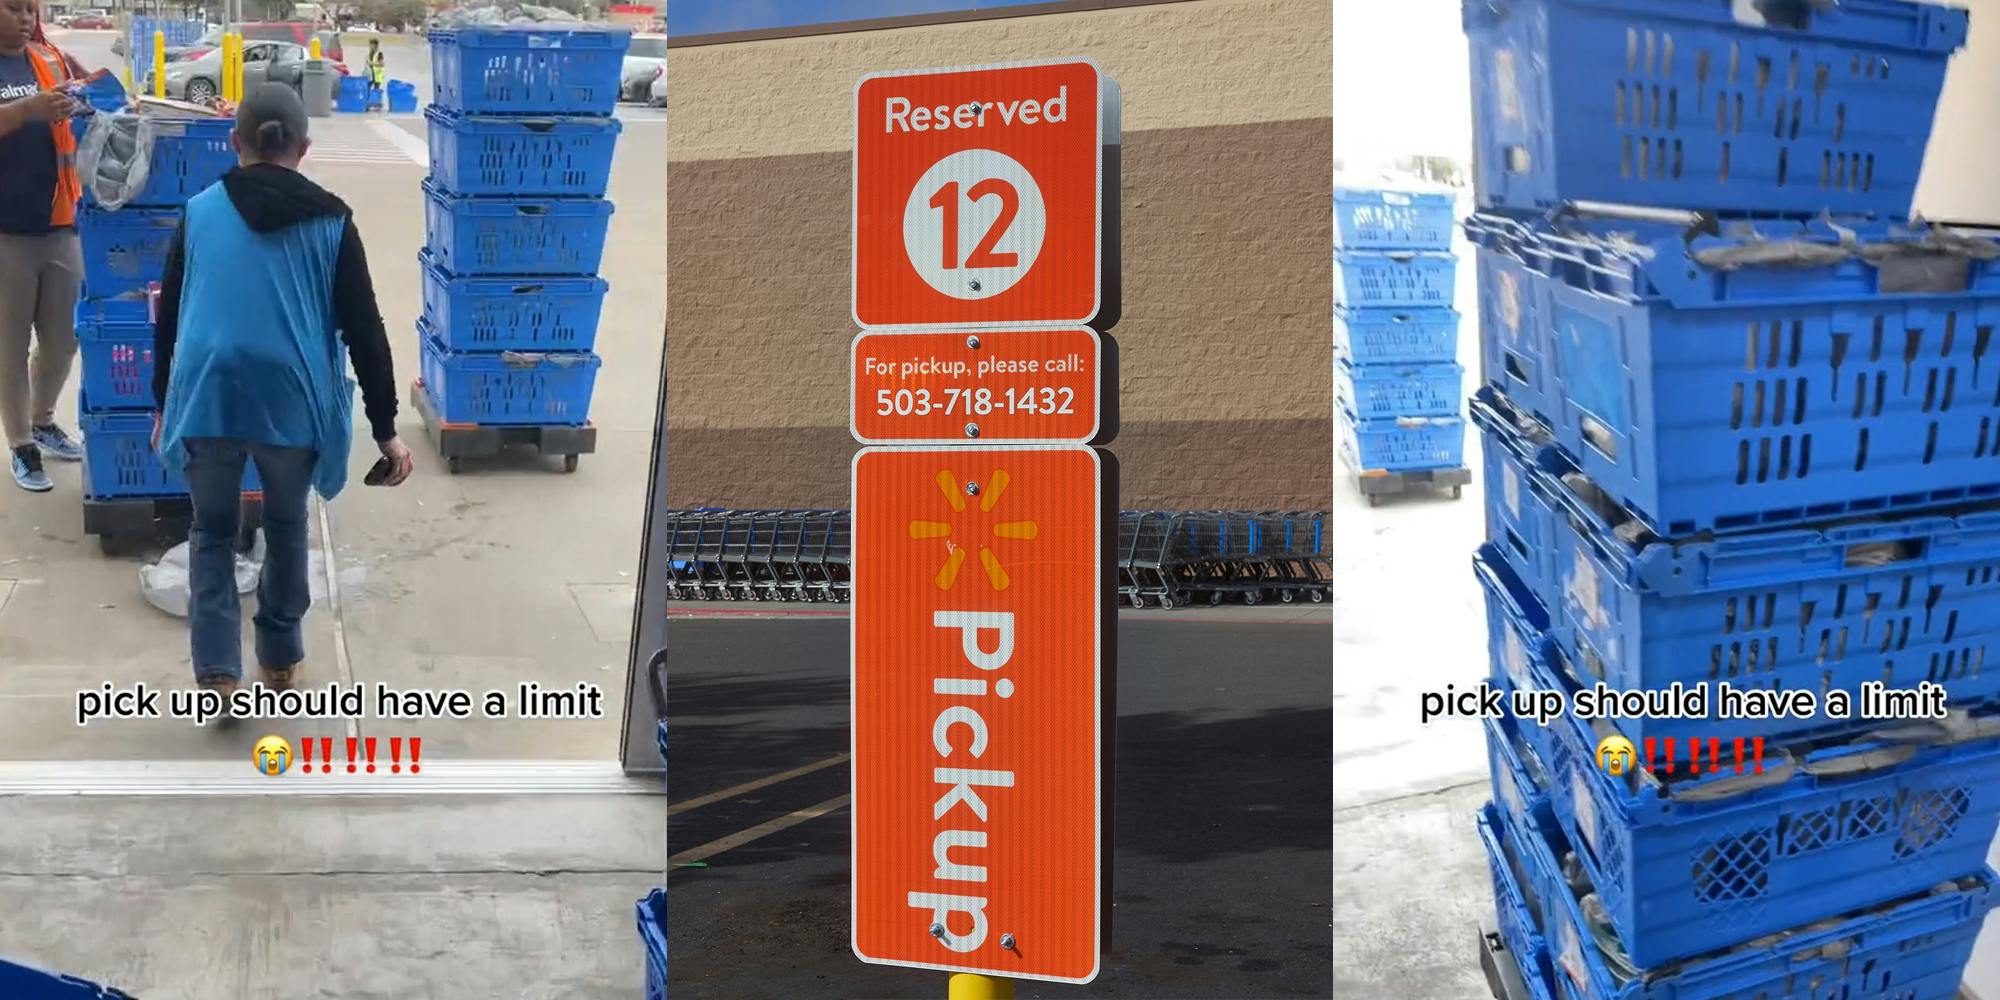 Walmart employees with blue pickup bins and caption "pick up should have a limit" (l) Walmart reserved parking for Pickup orders sign (c) Walmart blue pickup bins and caption "pick up should have a limit" (r)